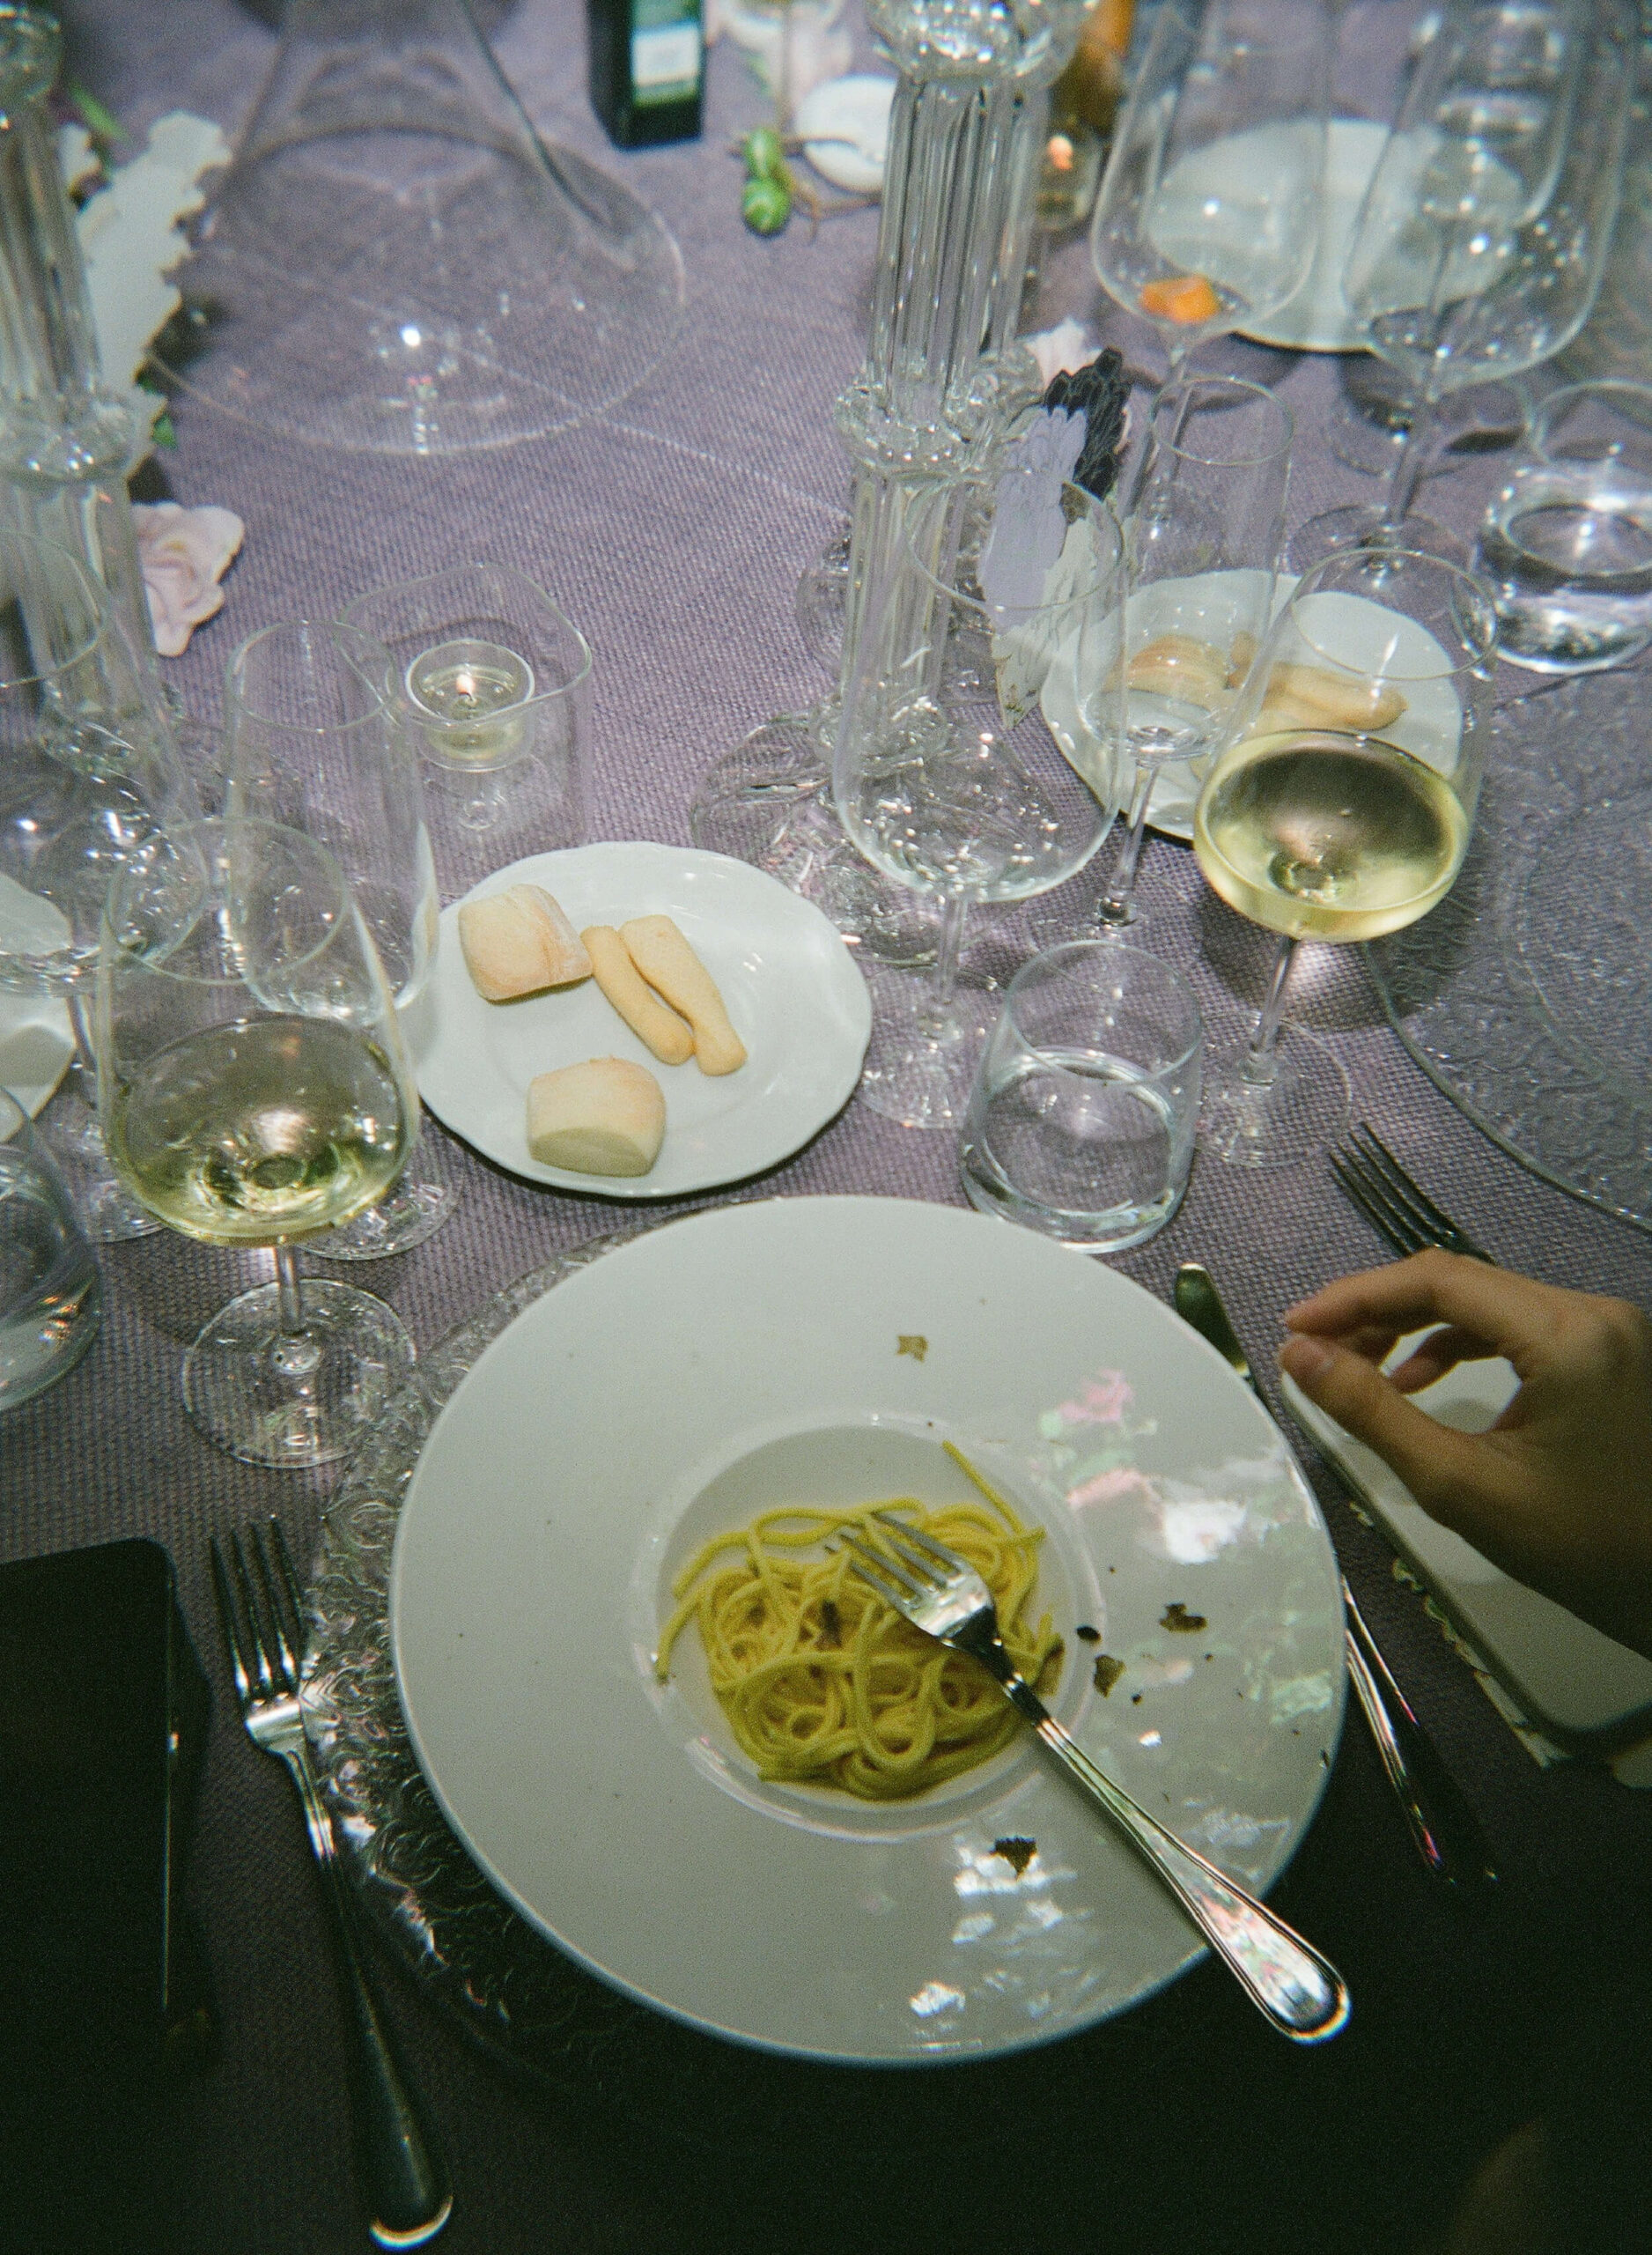 food and wine at the dinner table